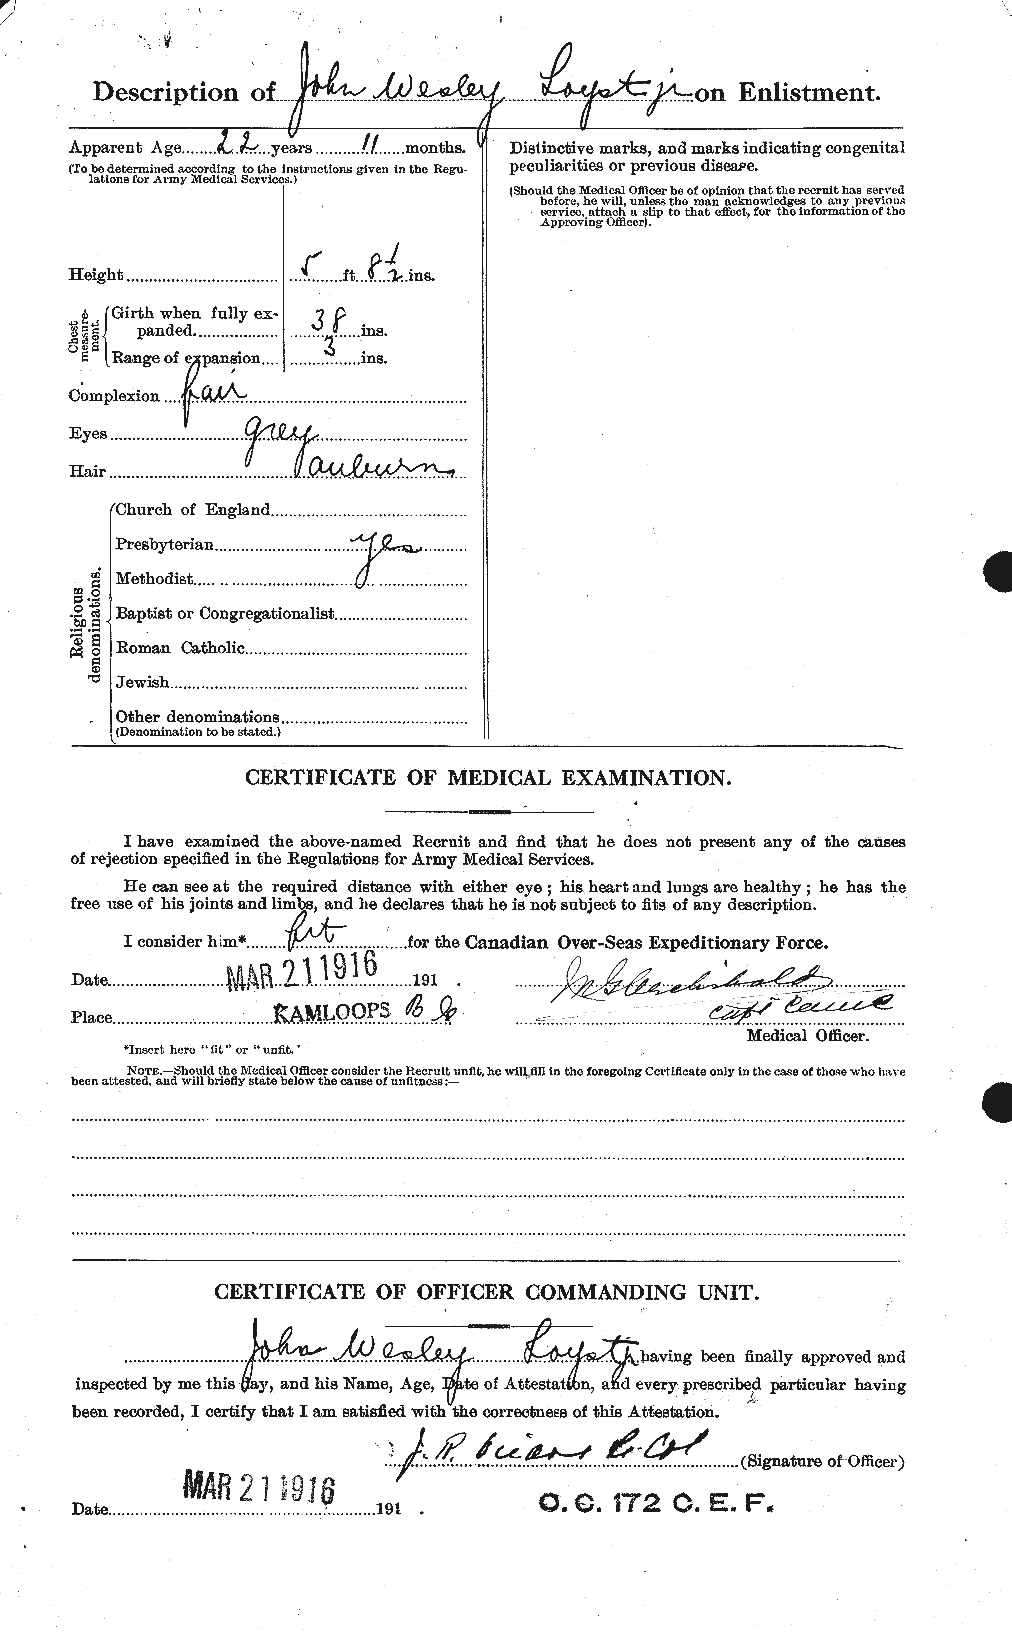 Personnel Records of the First World War - CEF 475313b